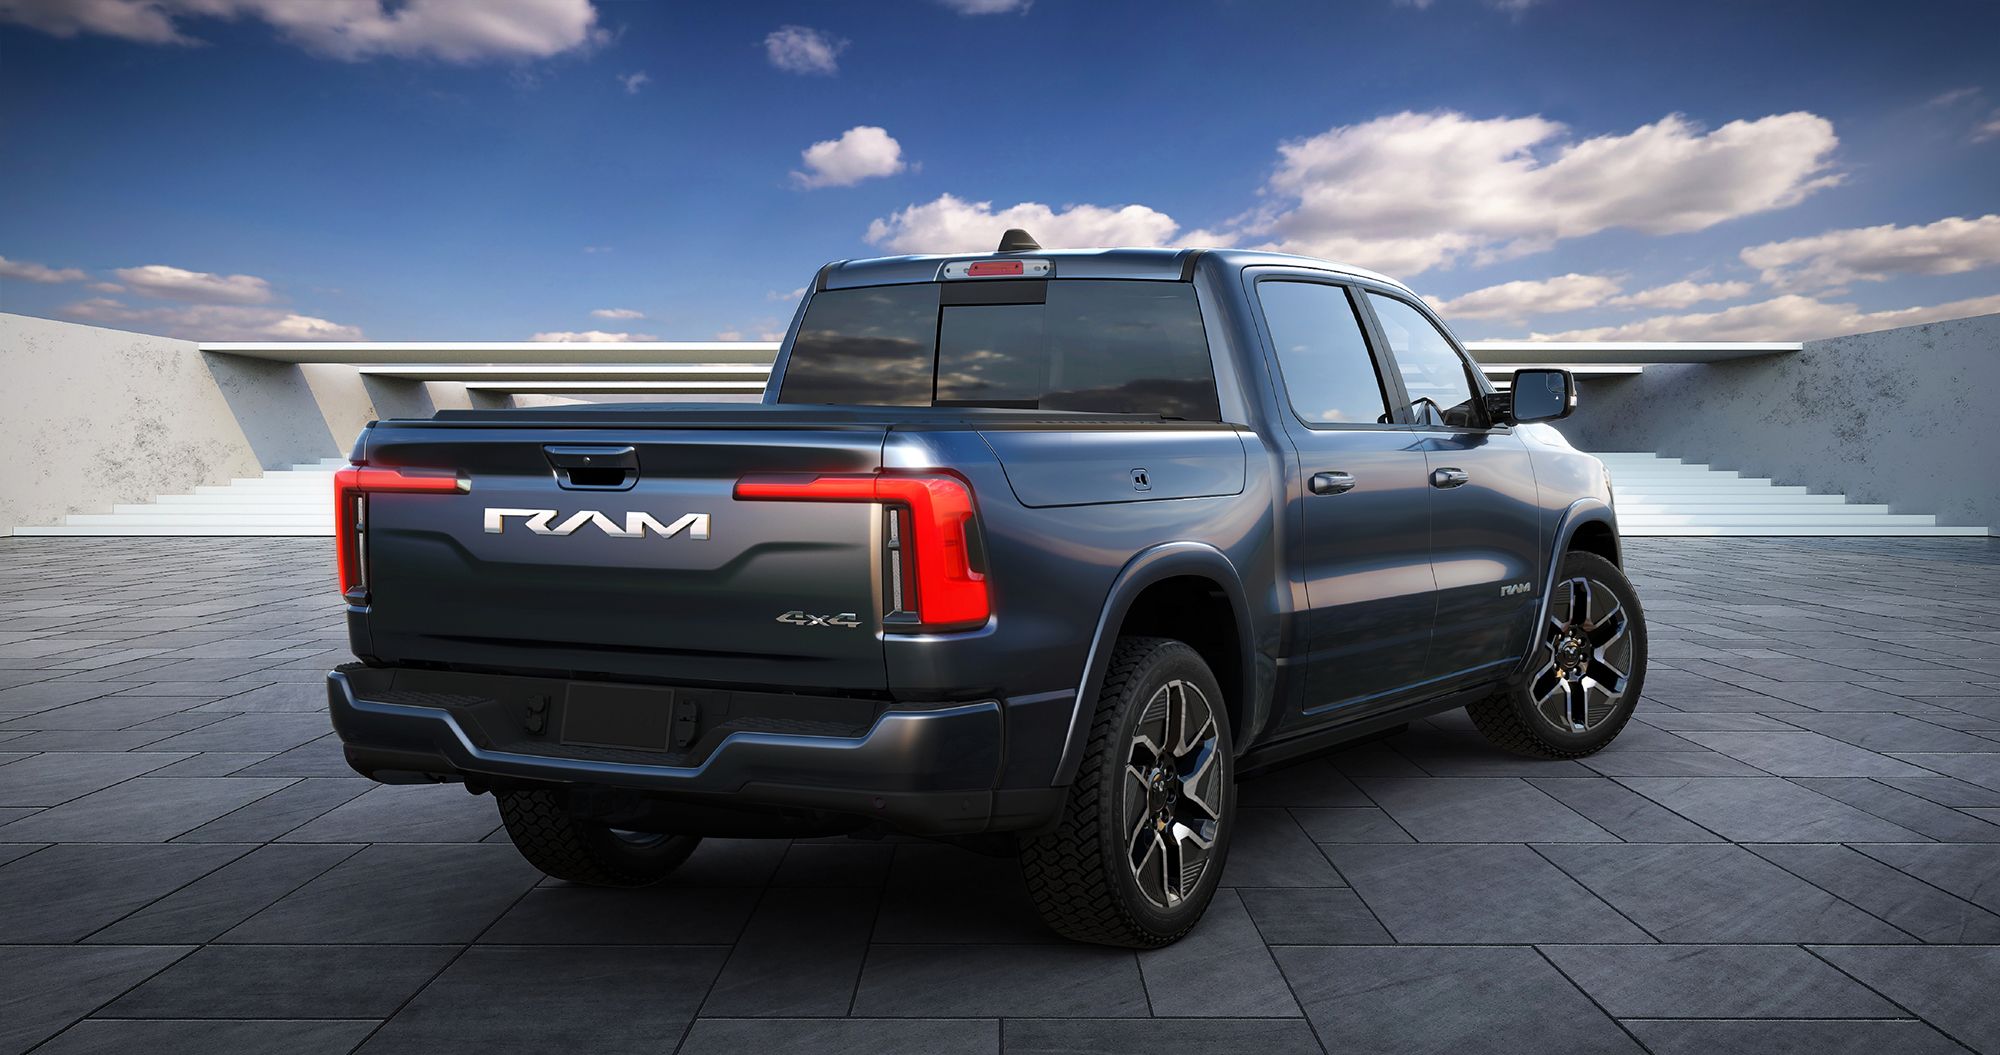 The hybrid Ramcharger pickup is good for anyone scared of going EV